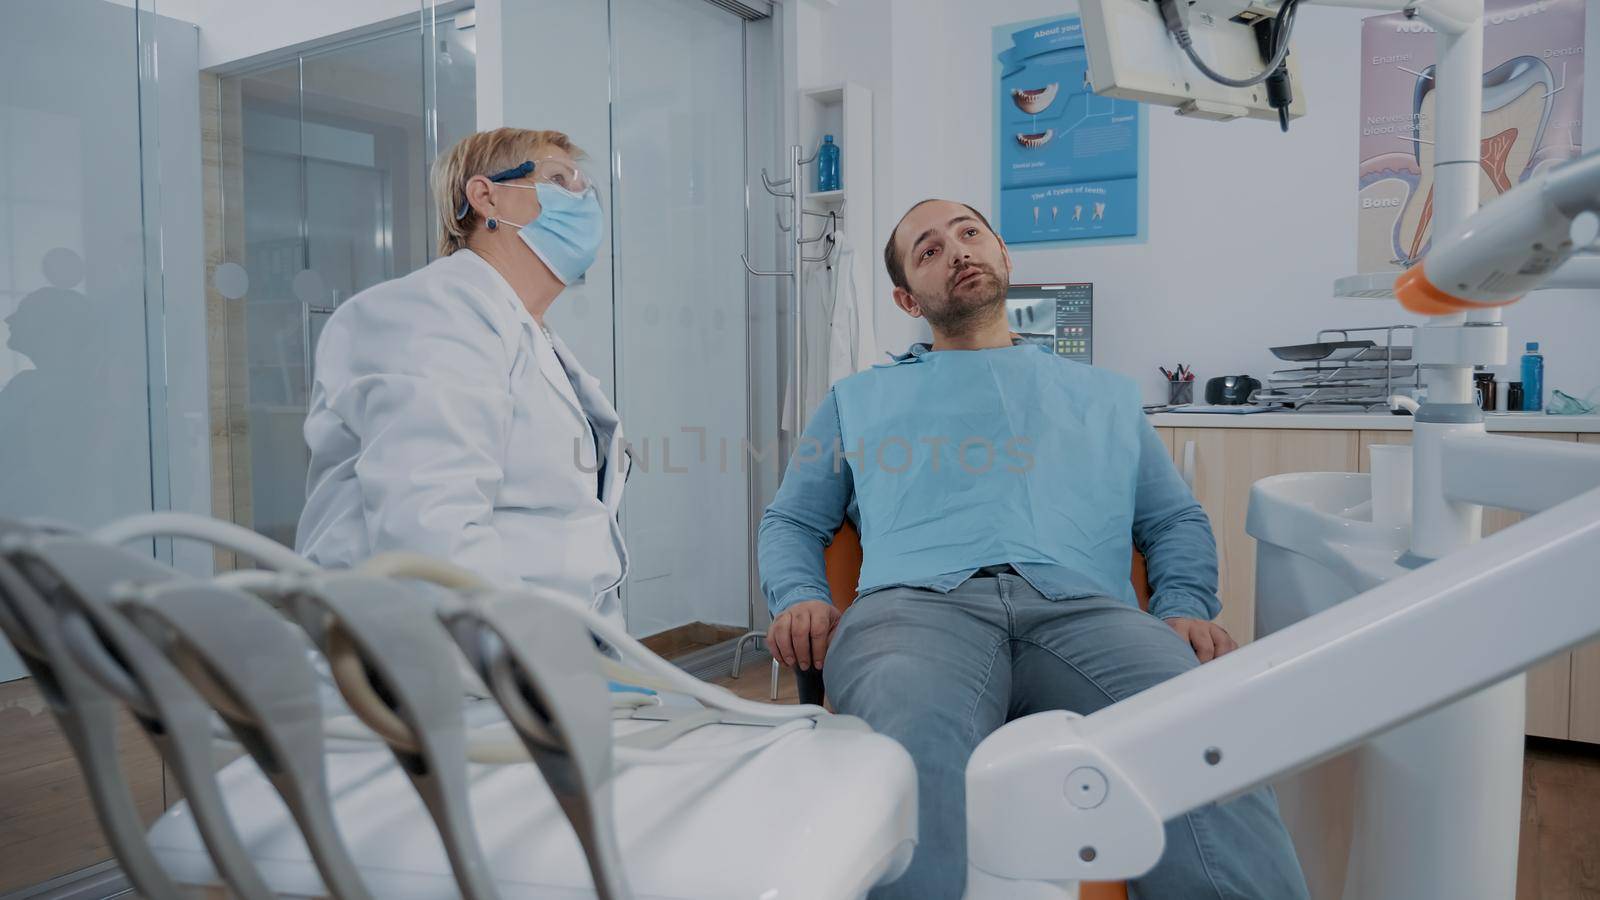 Orthodontist pointing at teeth radiography on monitor to show caries diagnosis to patient in pain. Dentist explaining x ray scan and stomatological procedure to cure toothache.